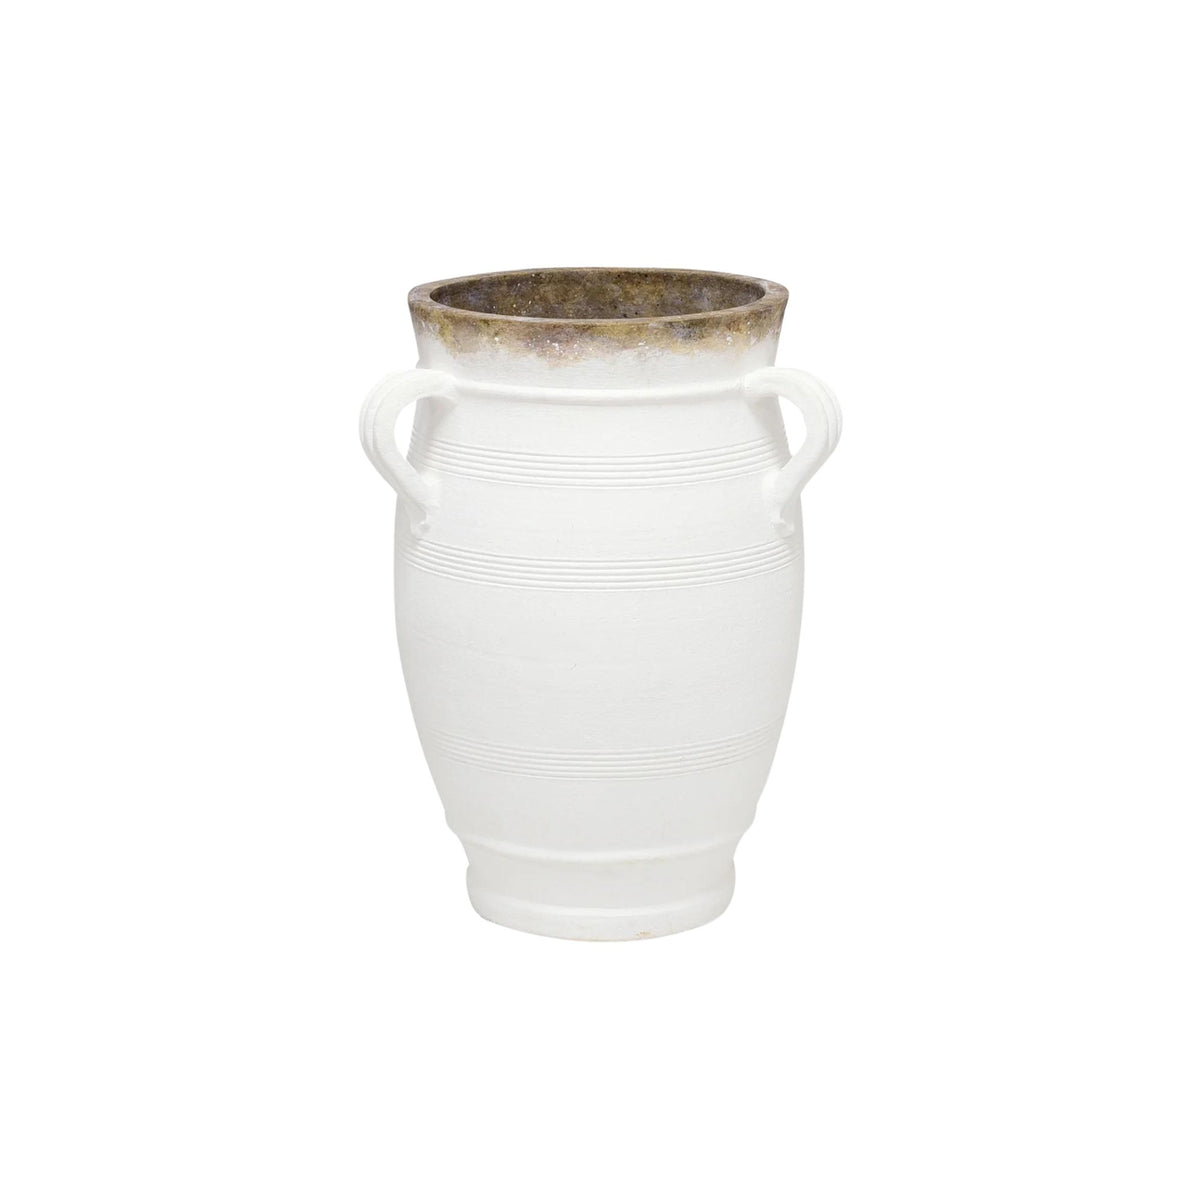 Tuscan 3 Handle Pot in White Terracotta